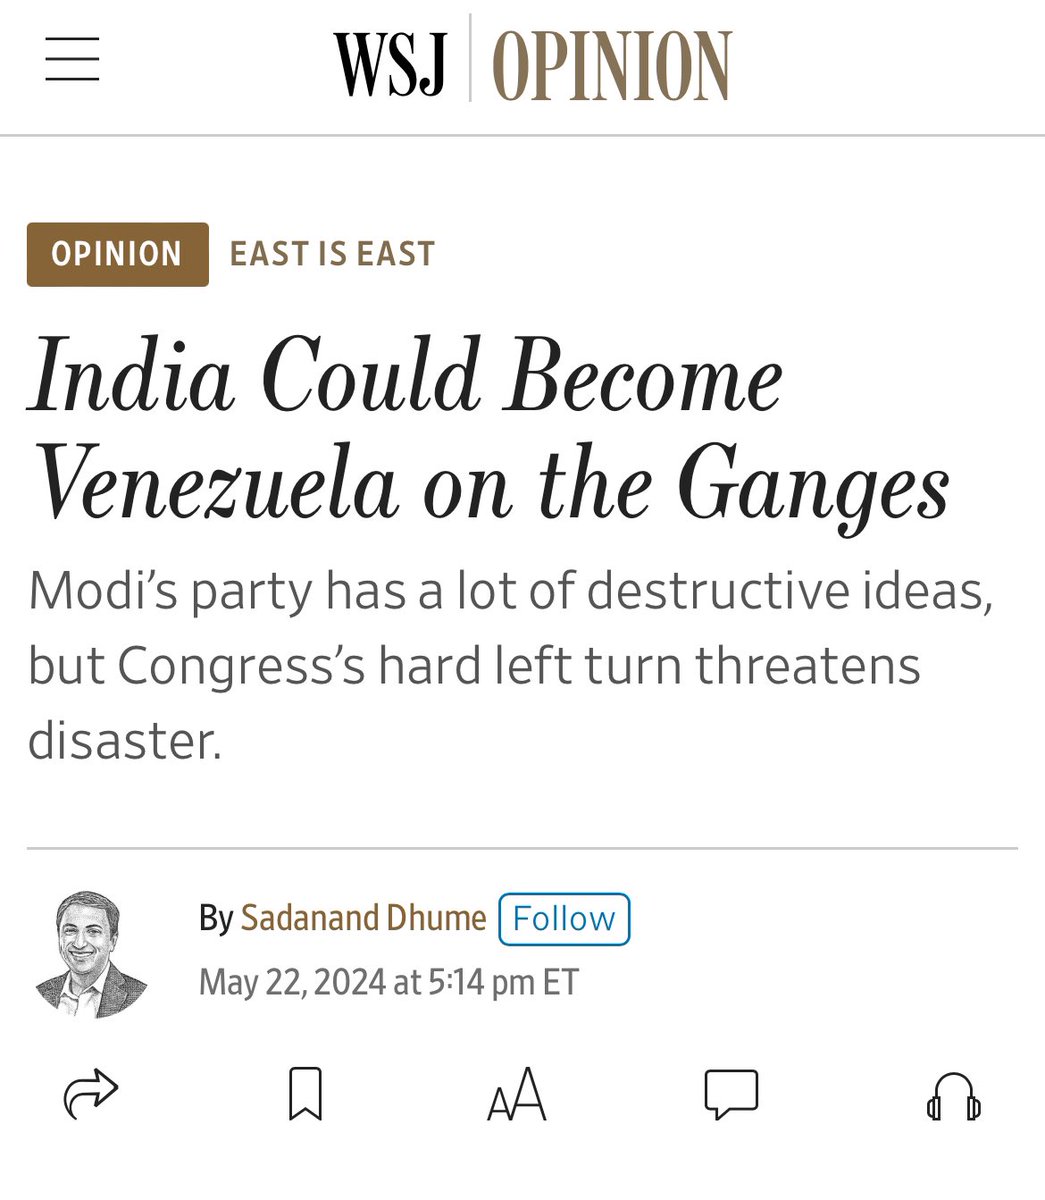 Rahul Gandhi’s anti-business philosophy and redistributionist fantasies could turn India into Venezuela on the Ganges. [My take] v @WSJopinion wsj.com/articles/india…